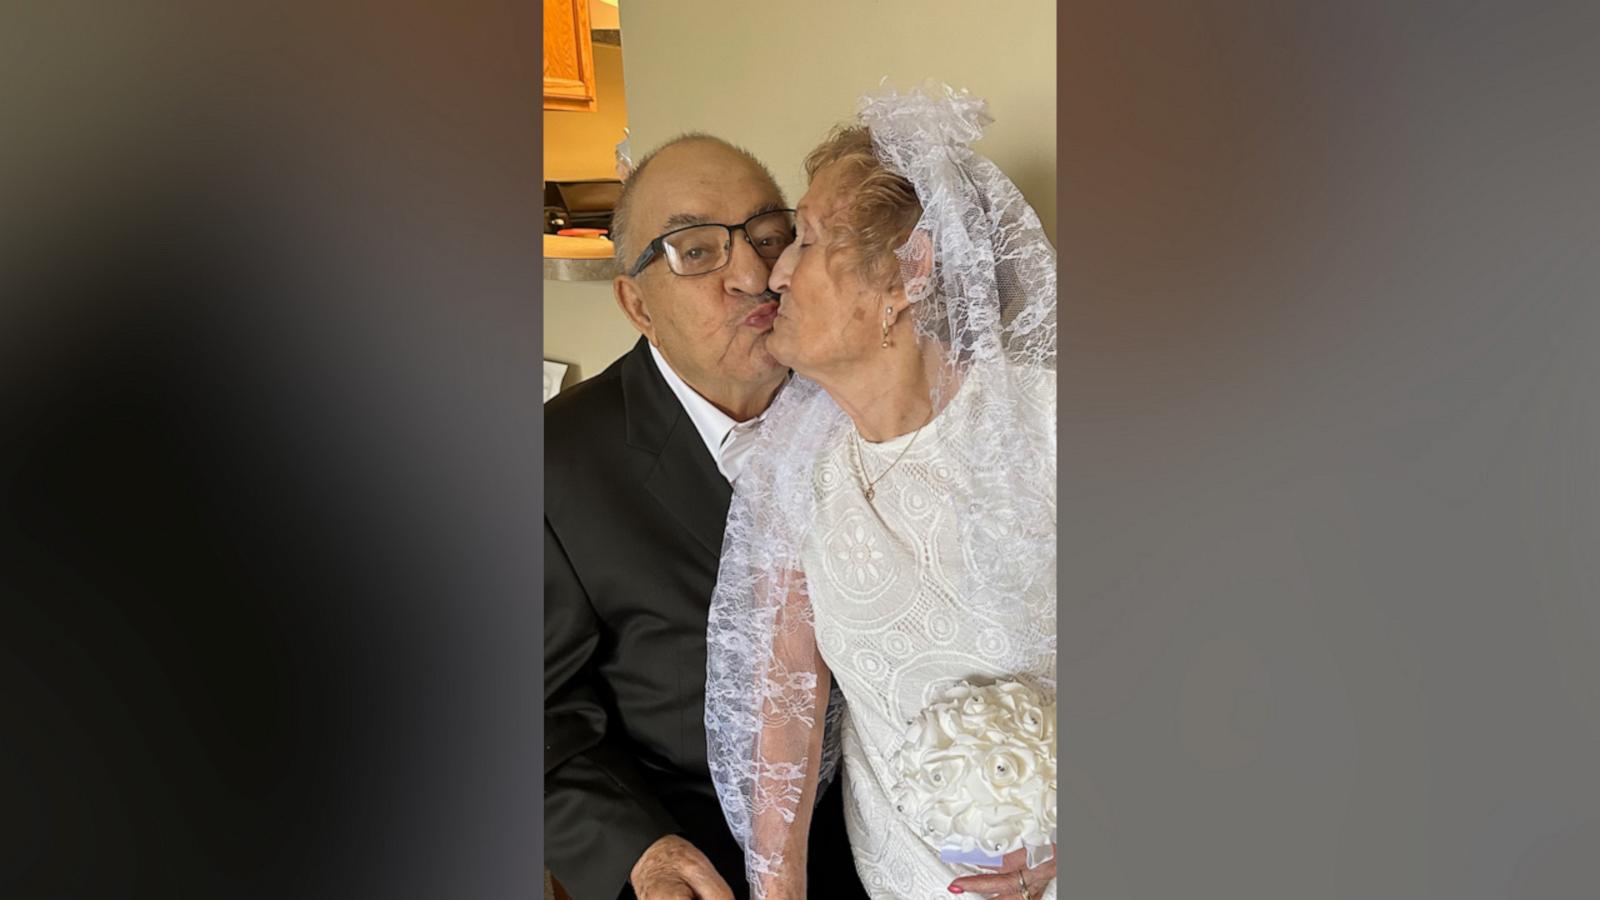 VIDEO: Couple celebrates 64th wedding anniversary by dressing as bride, groom on Halloween